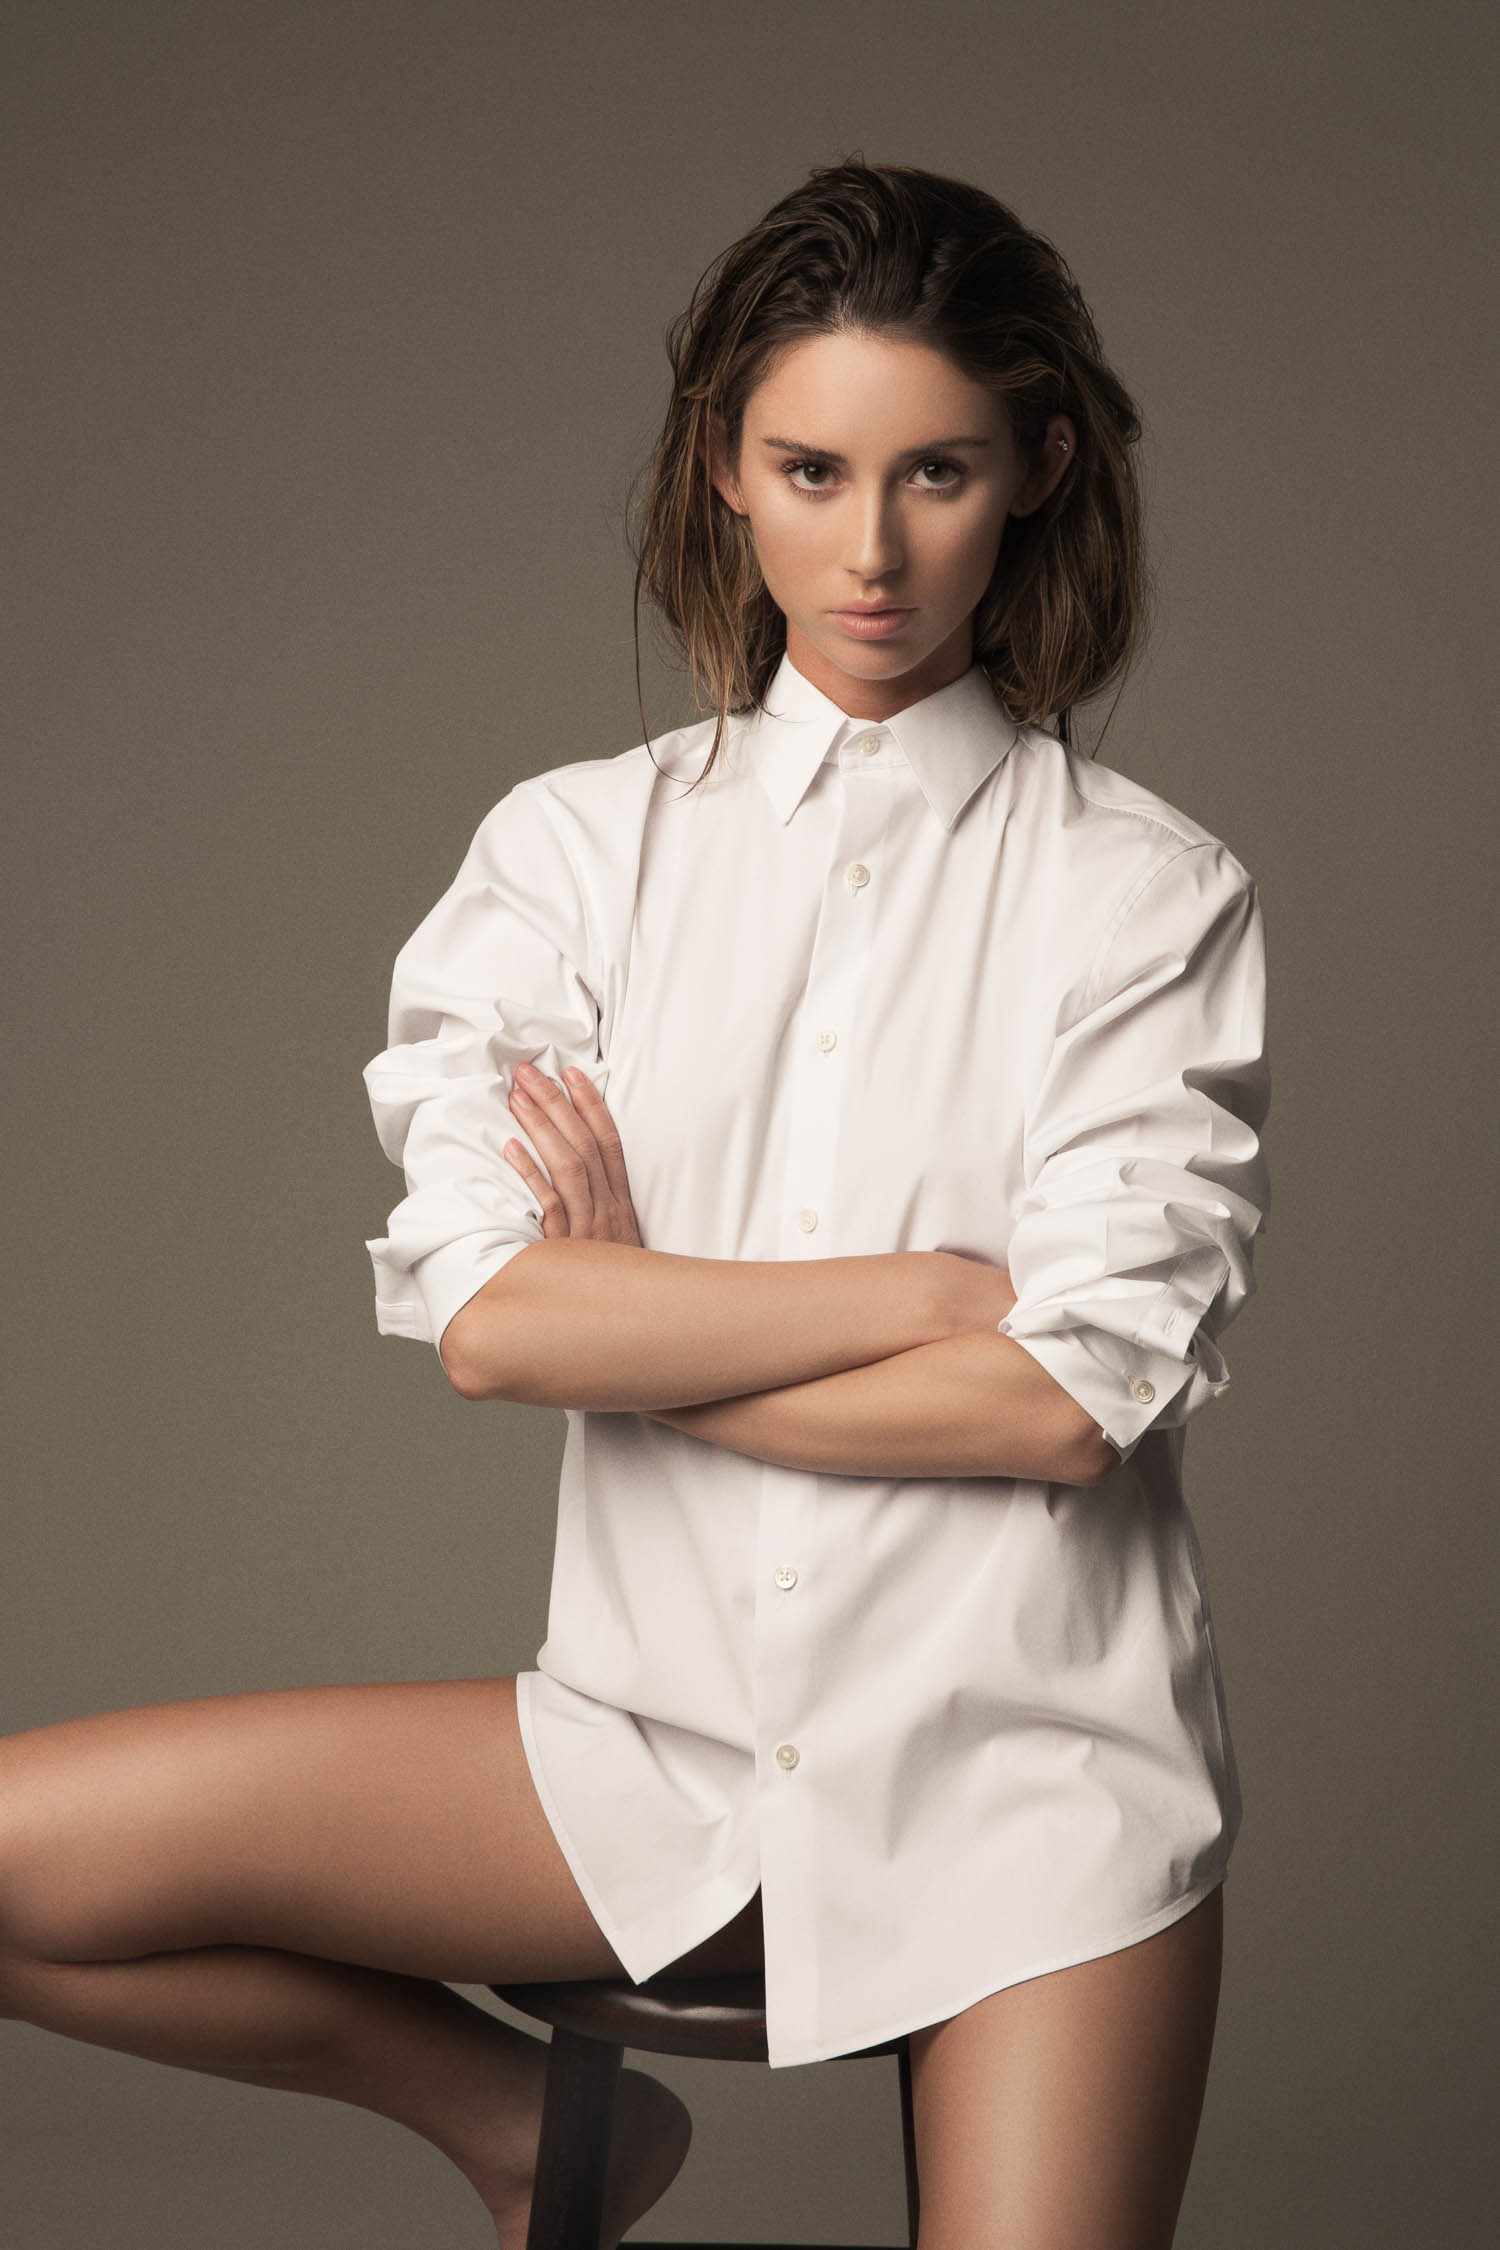 Model sitting in a white dress shirt with wet hair.